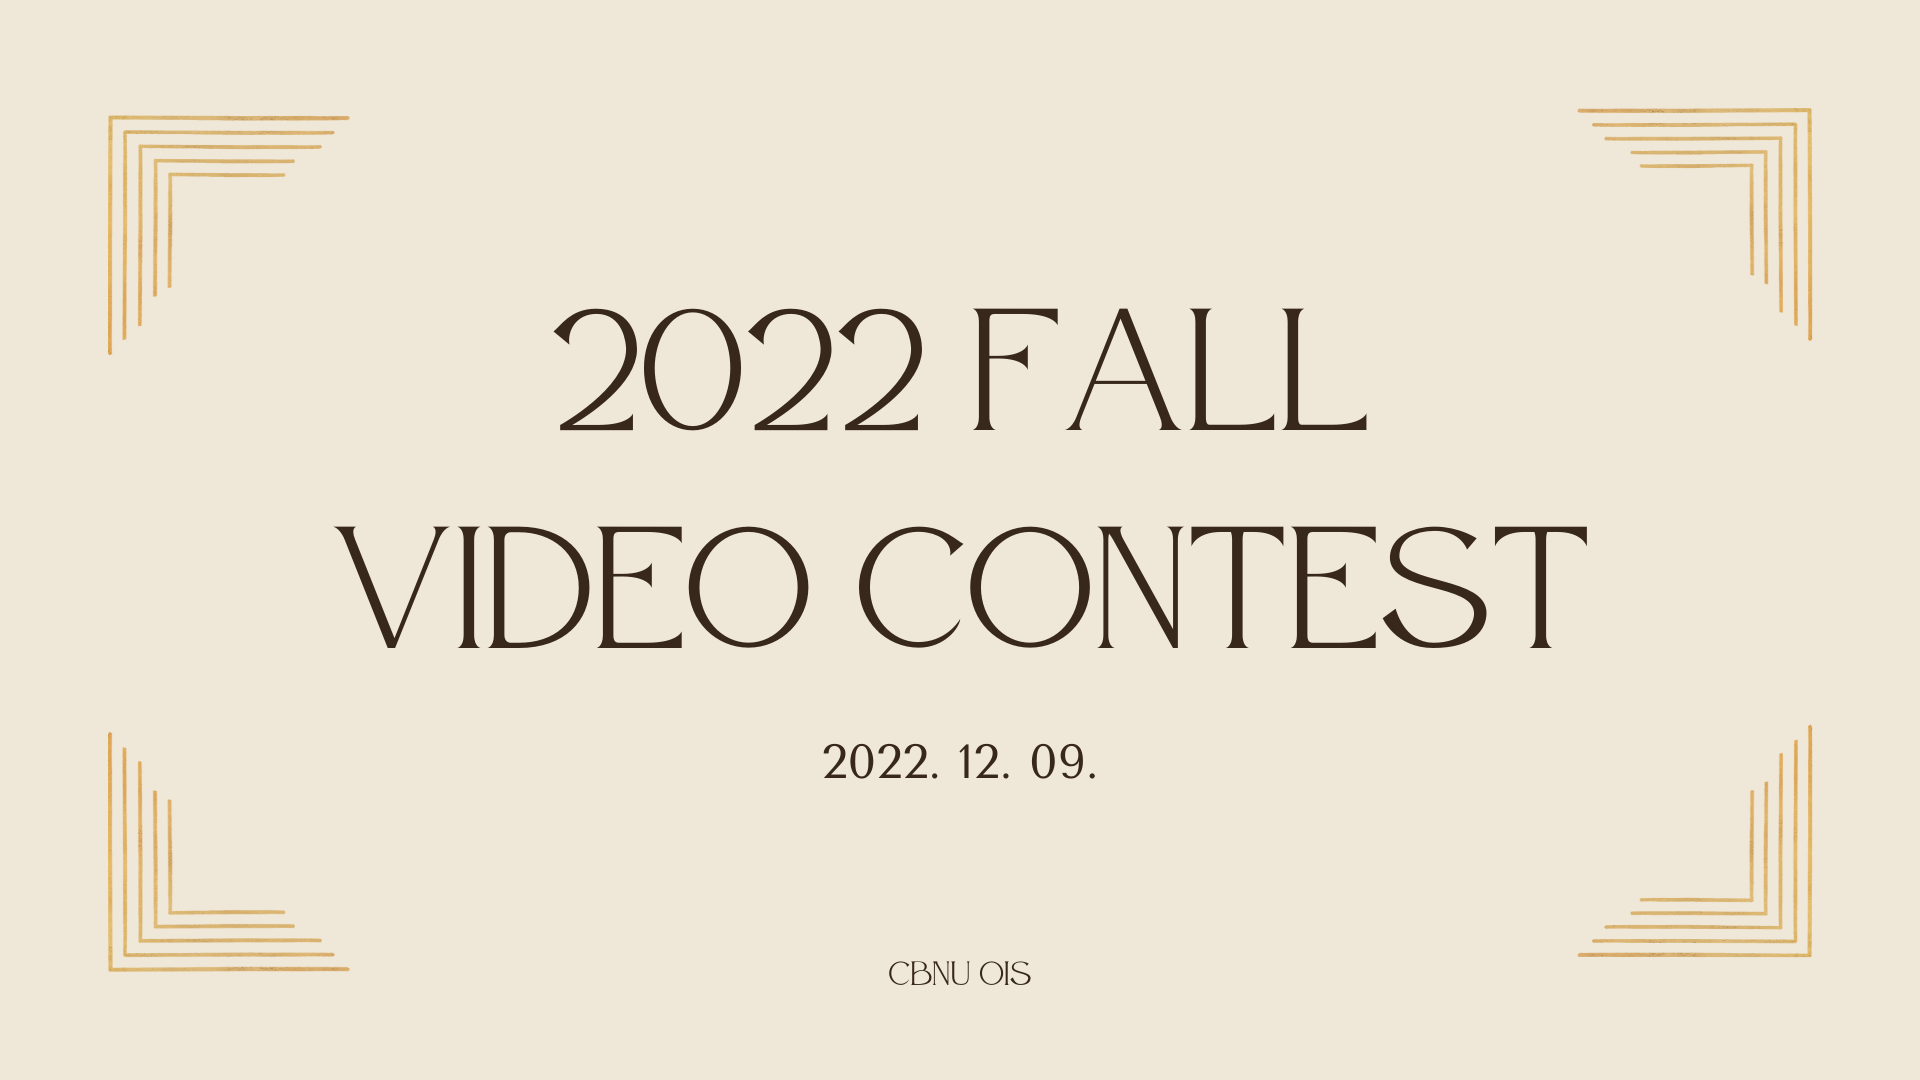 [2022 Fall] Video Contest_Video